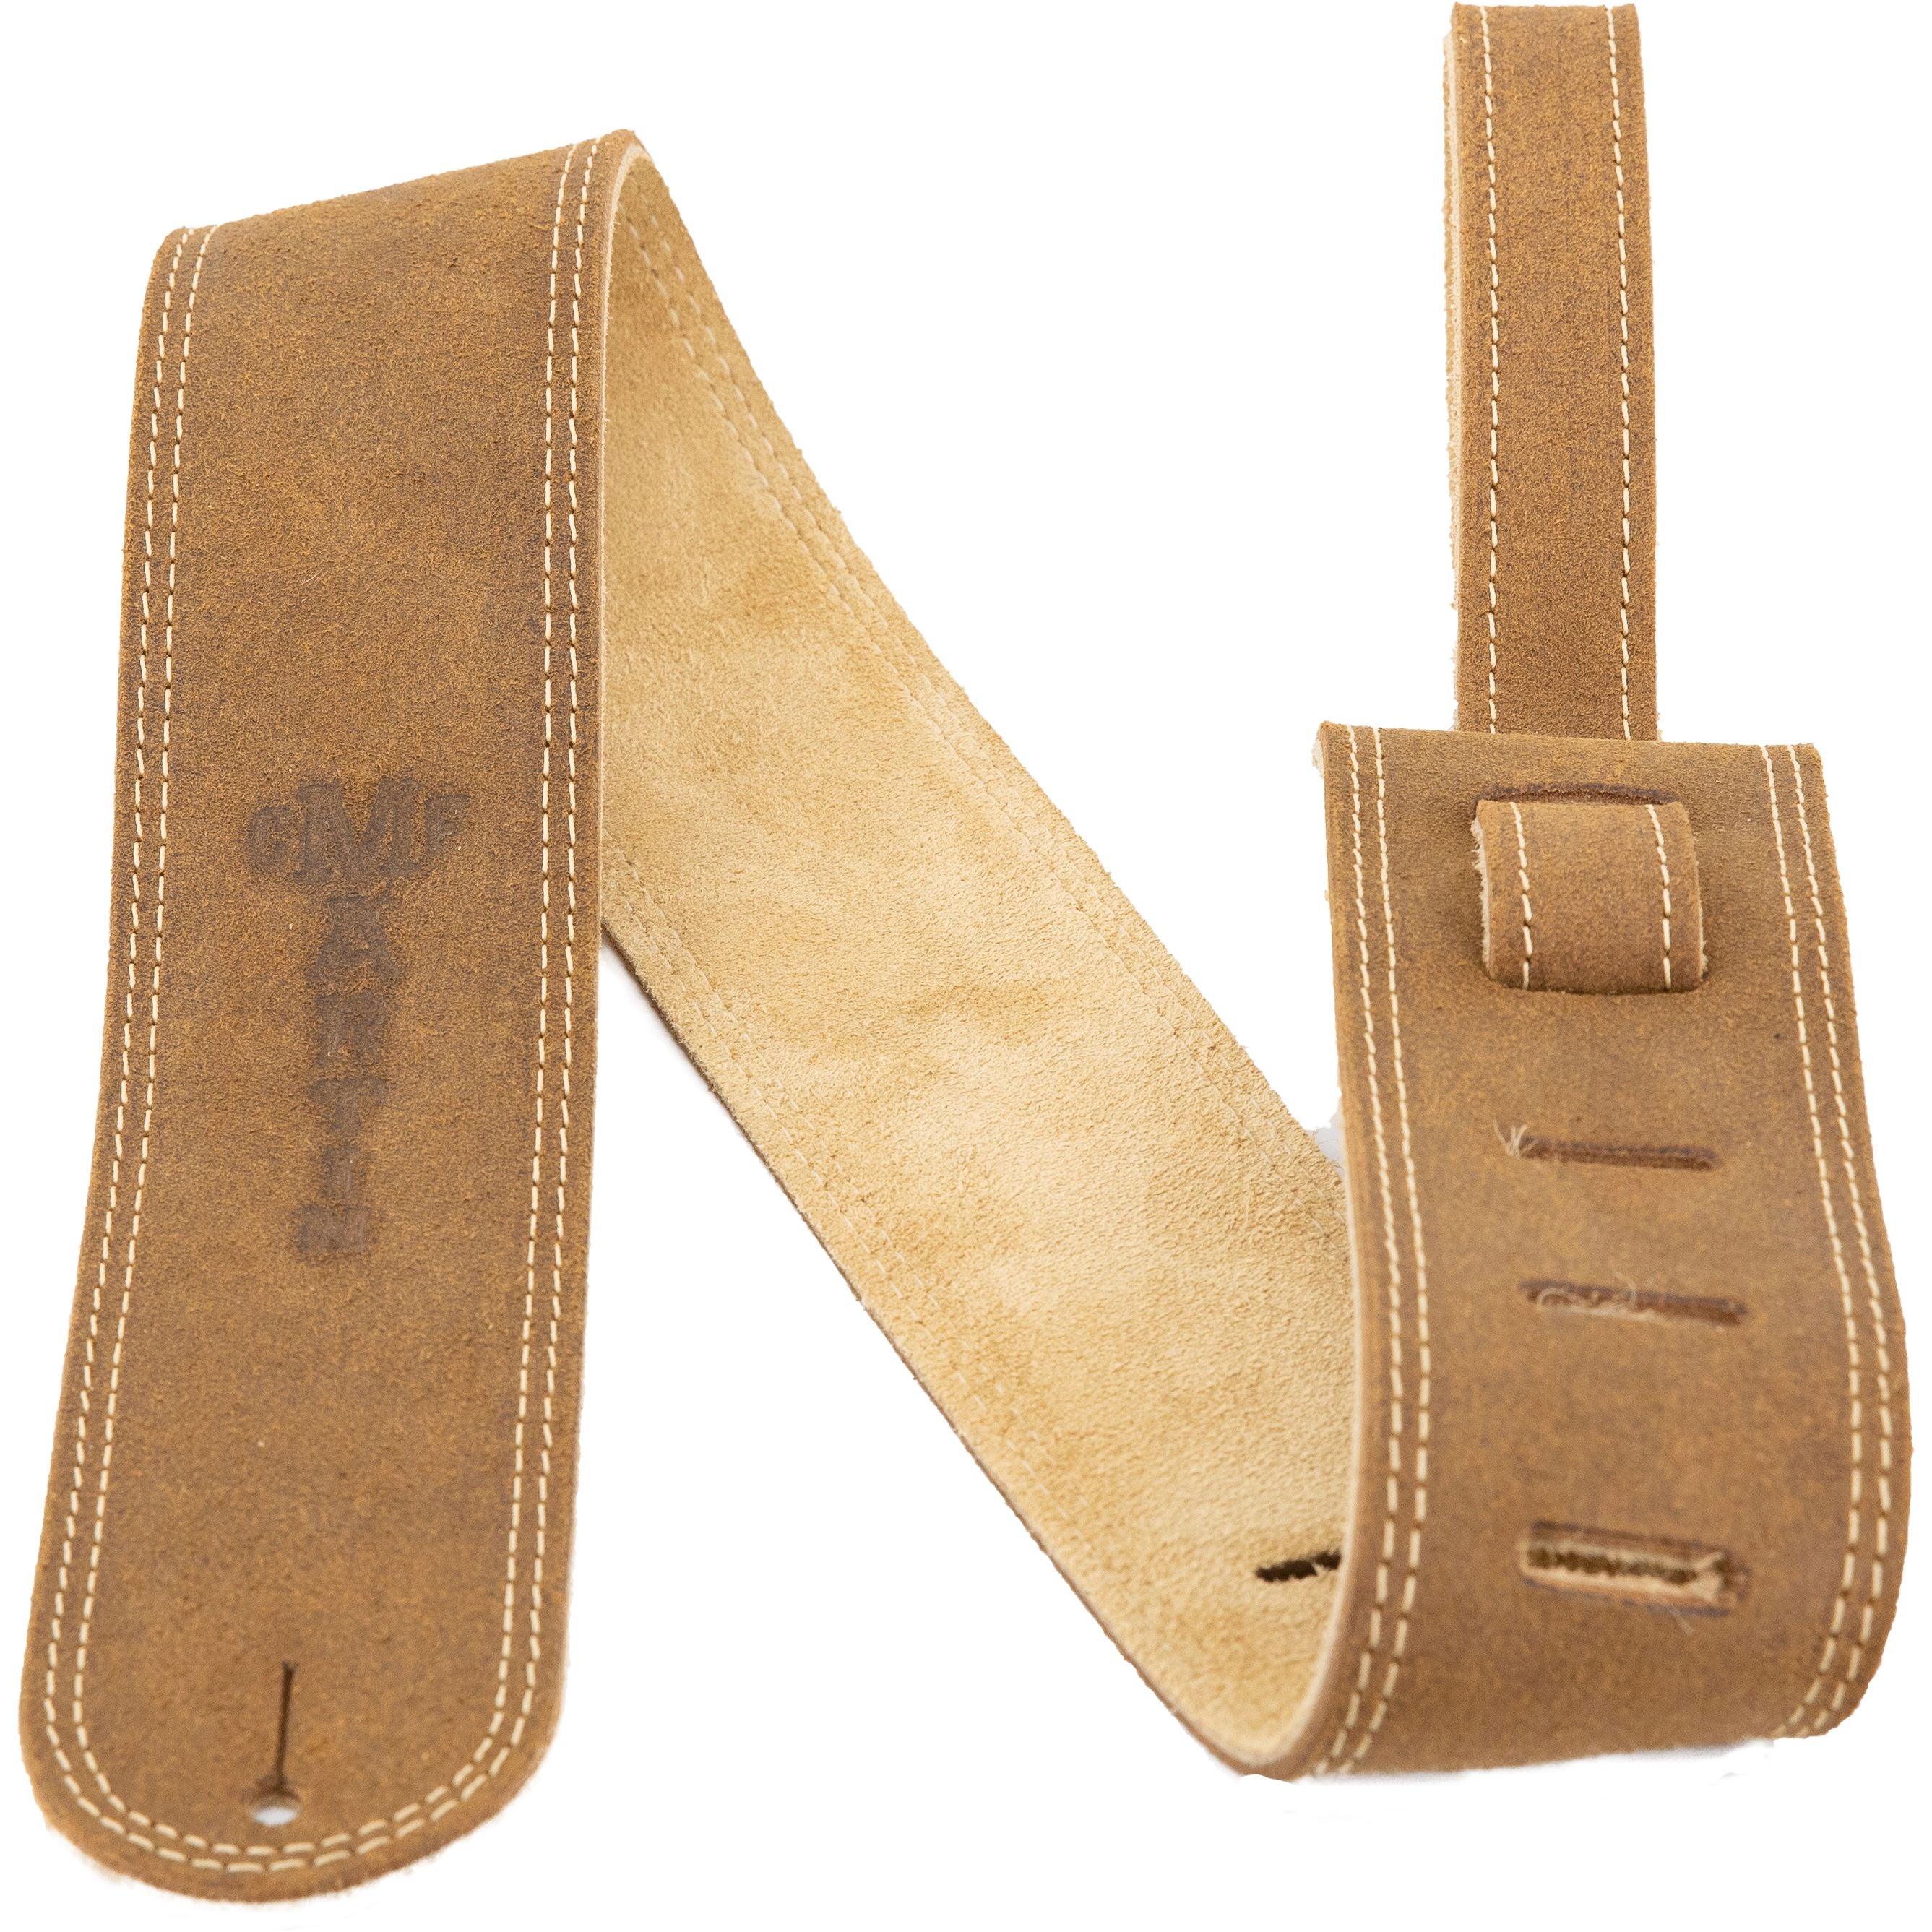 Martin Belt Leather Antiques Doublee Suede Strap (A0027)